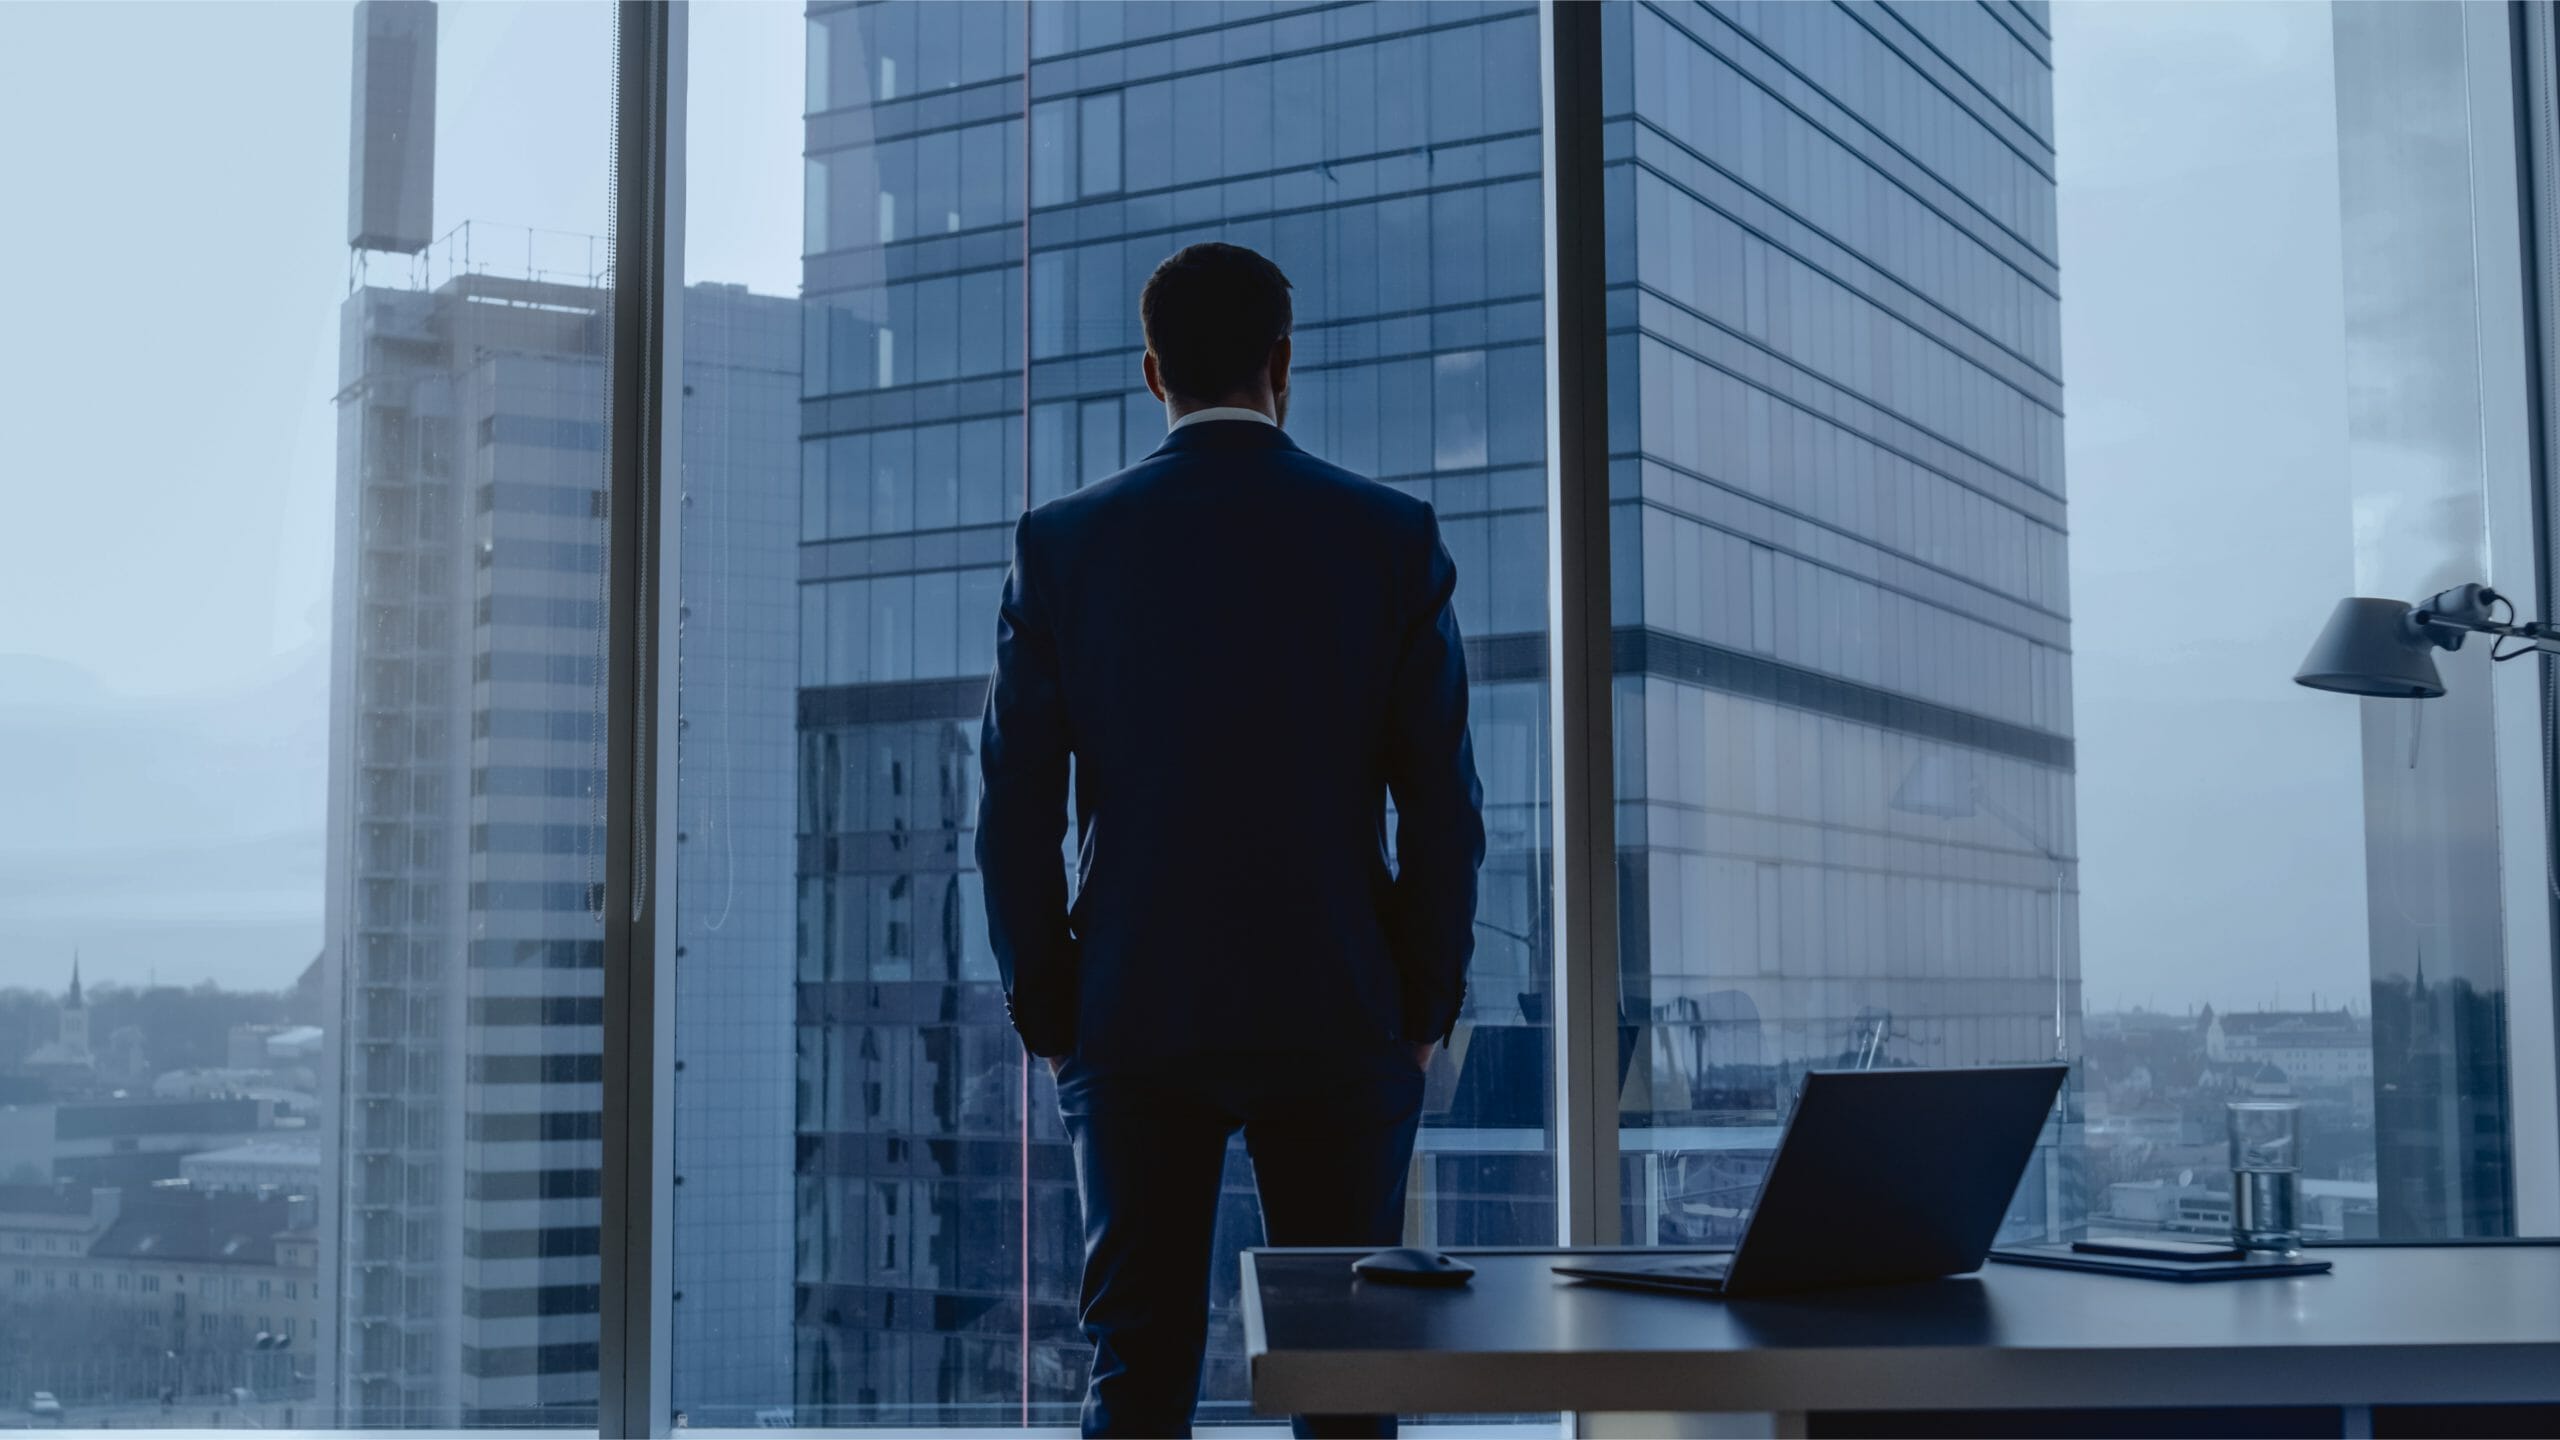 wealthy businessperson looking out the window of a high rise building